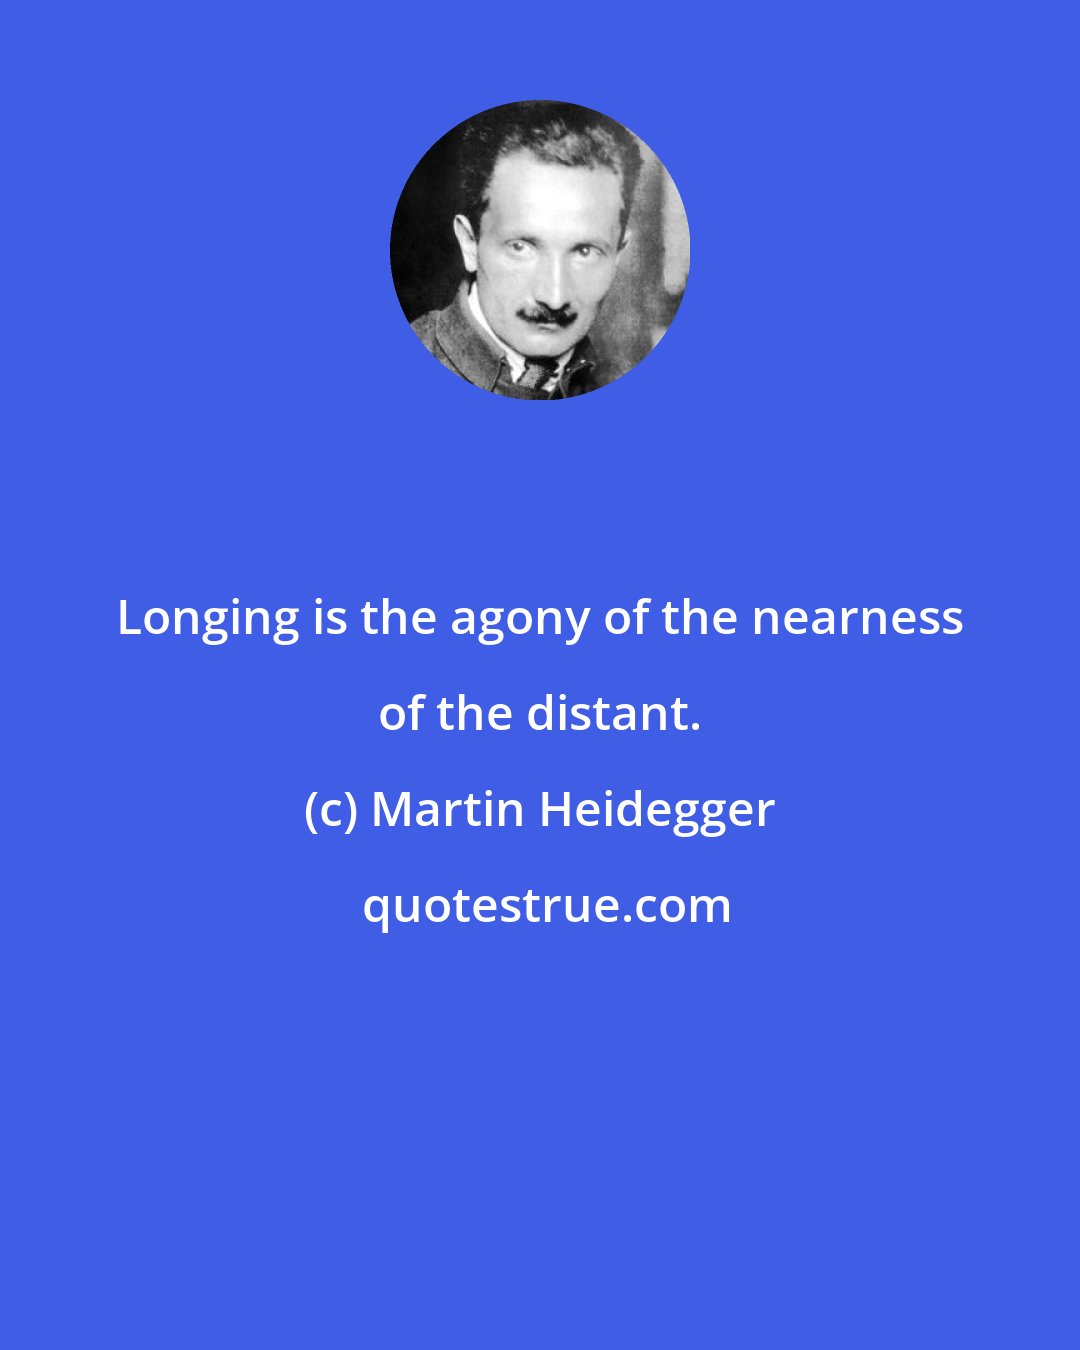 Martin Heidegger: Longing is the agony of the nearness of the distant.